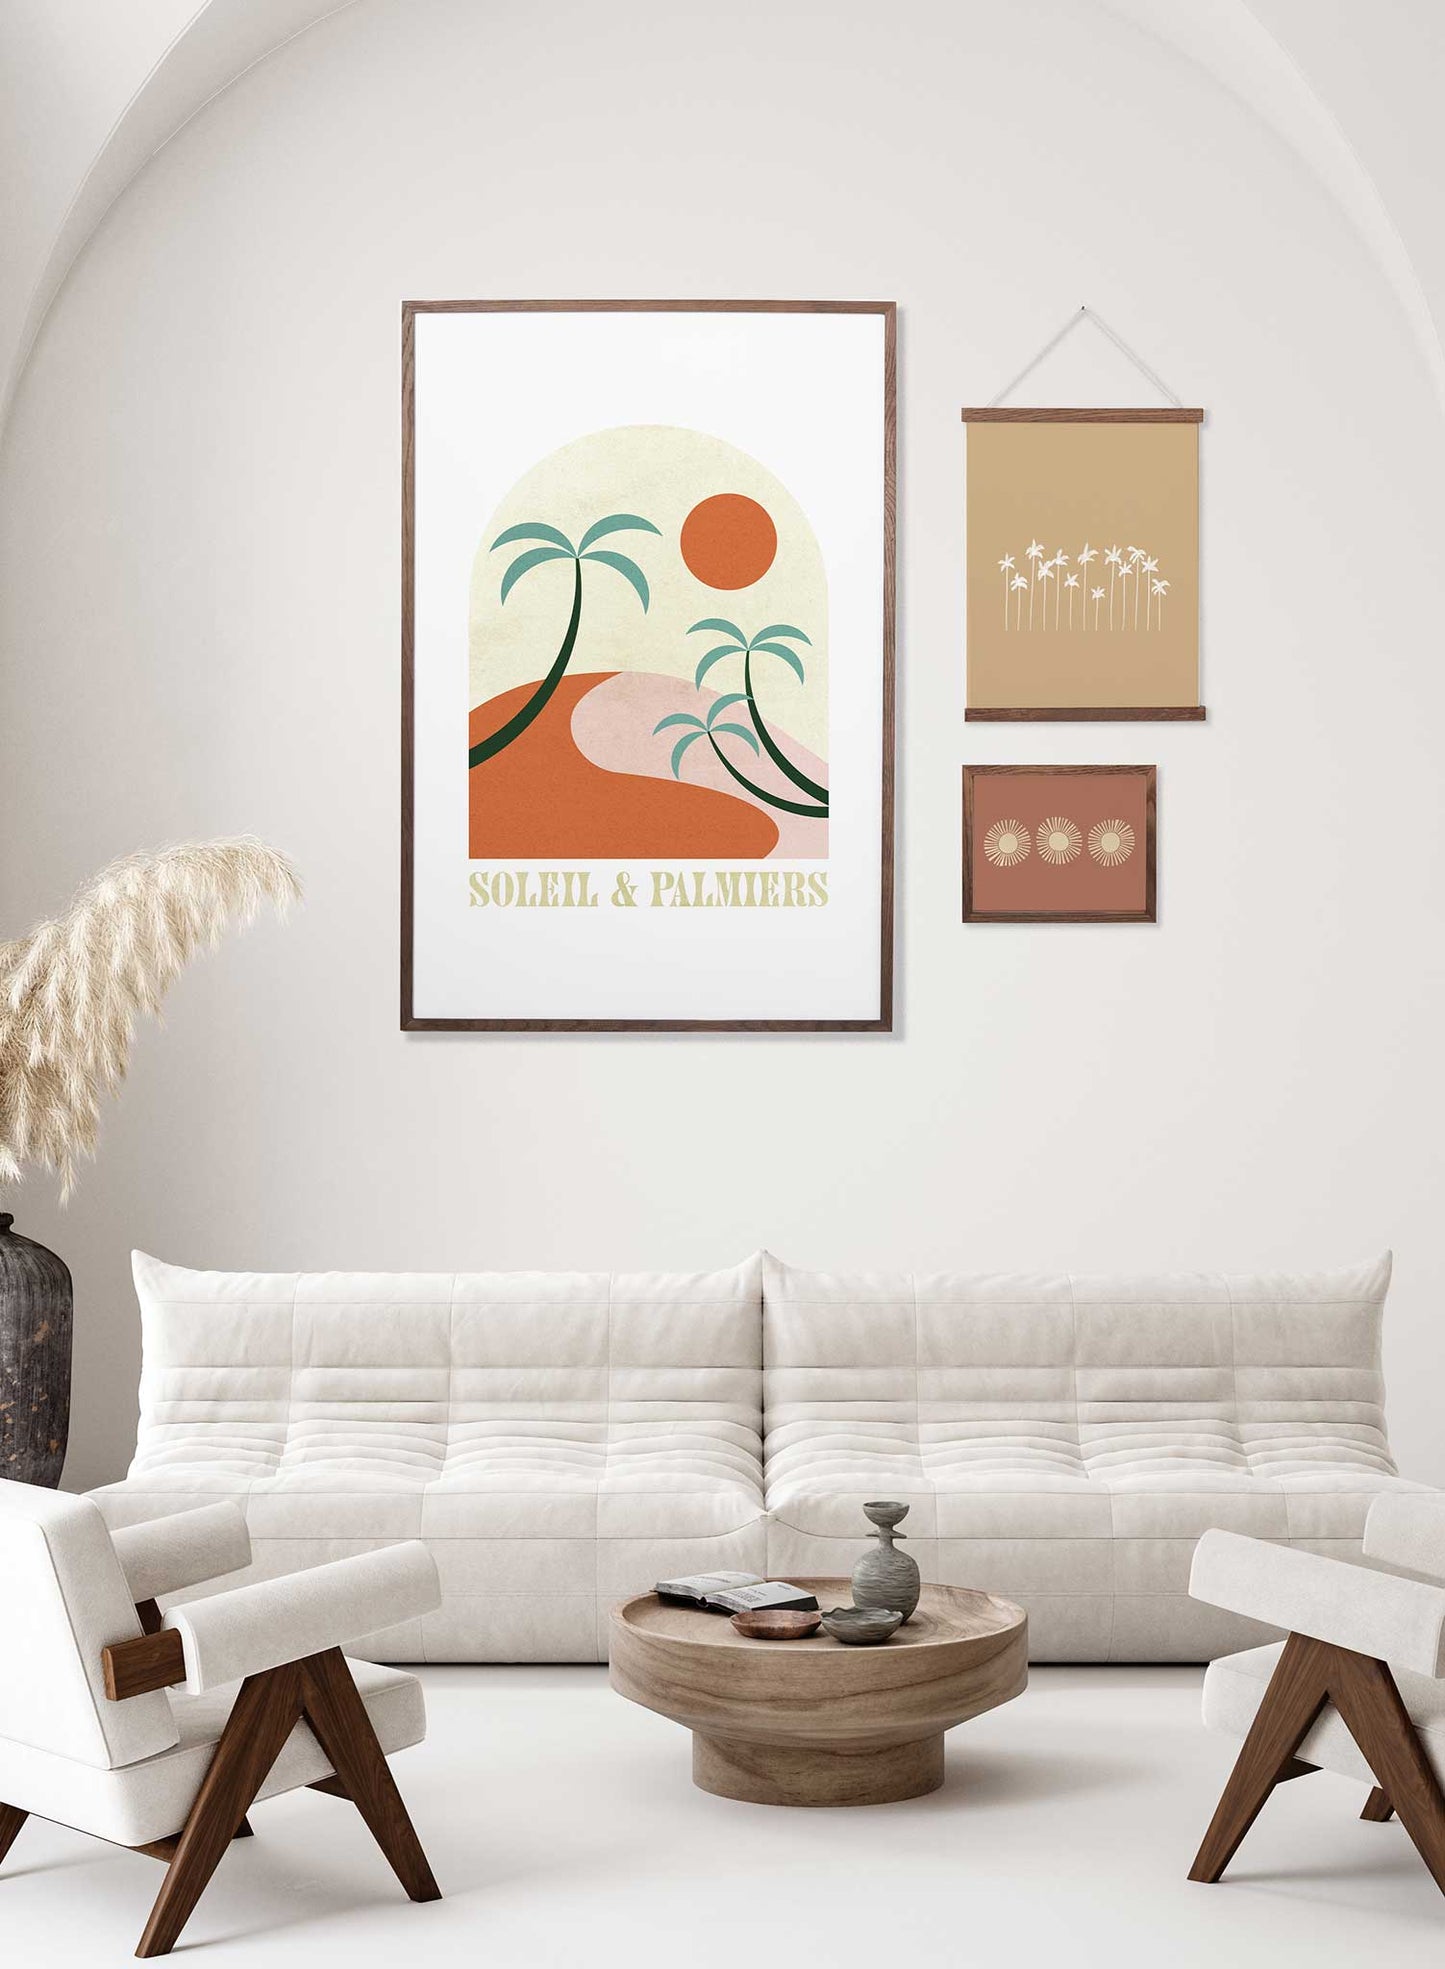 St-Tropez is a retro illustration poster of palm trees overlooking the sun by Opposite Wall.